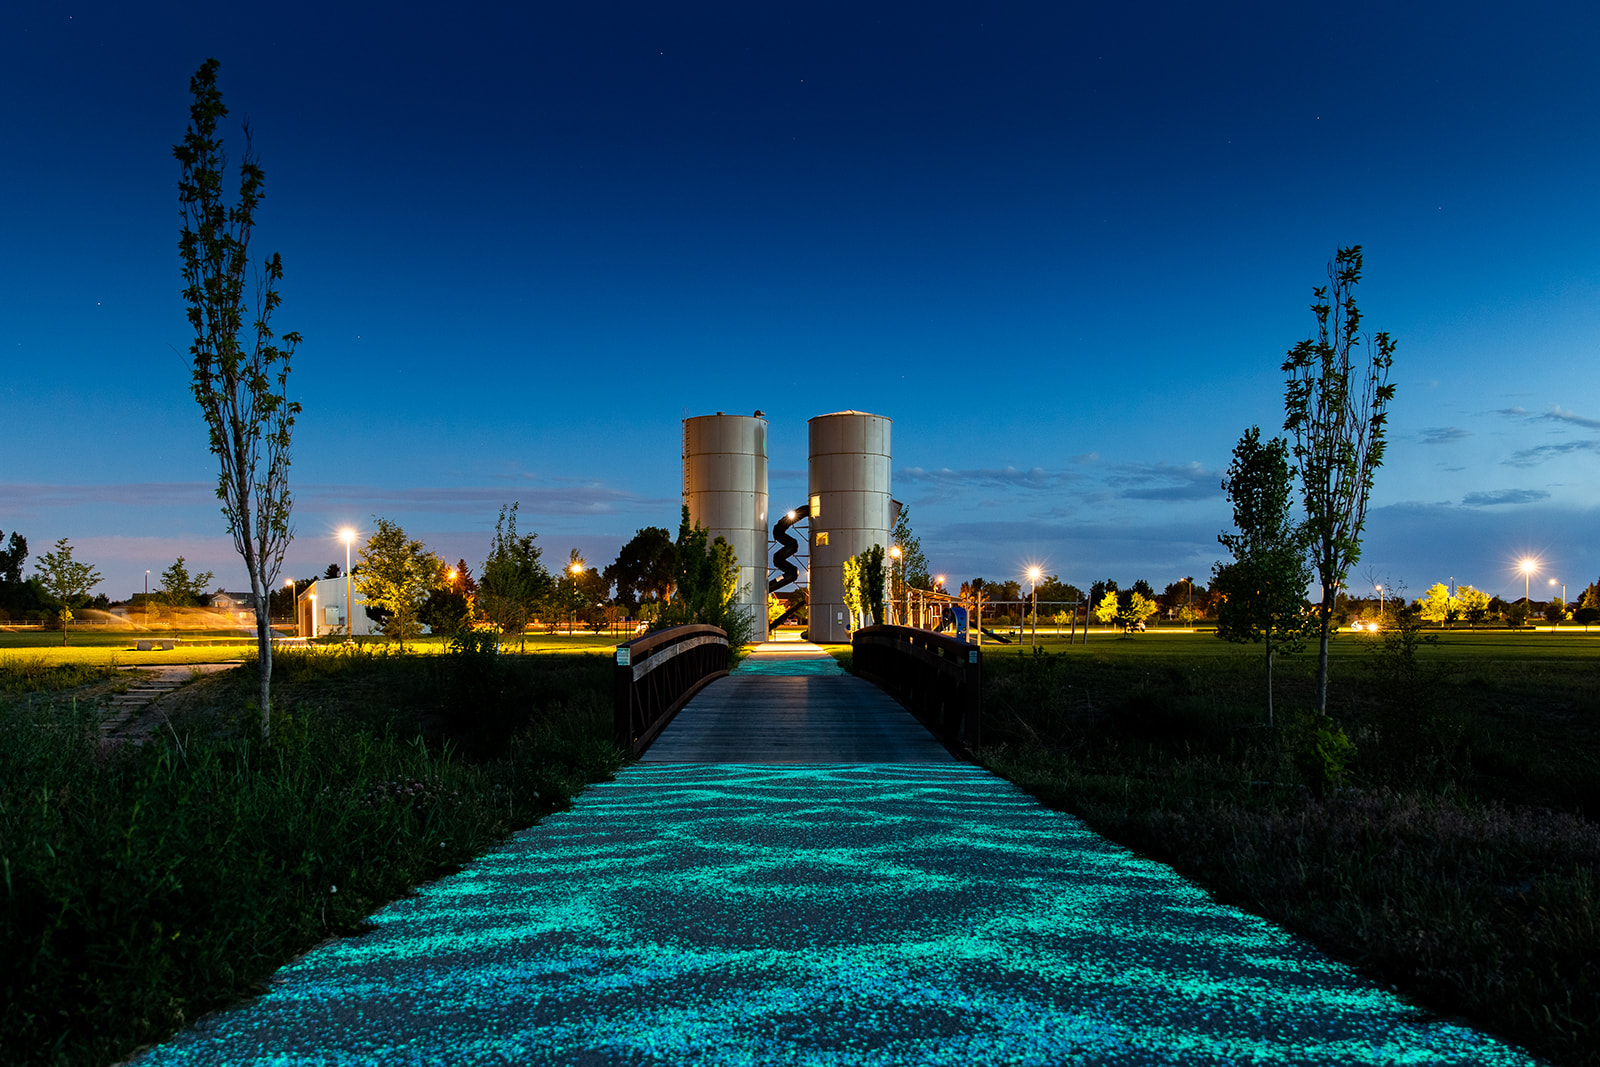 Glow stones lit up at night on a path at Twin Silo Park in Fort Collins, Colorado - John Robson Photography